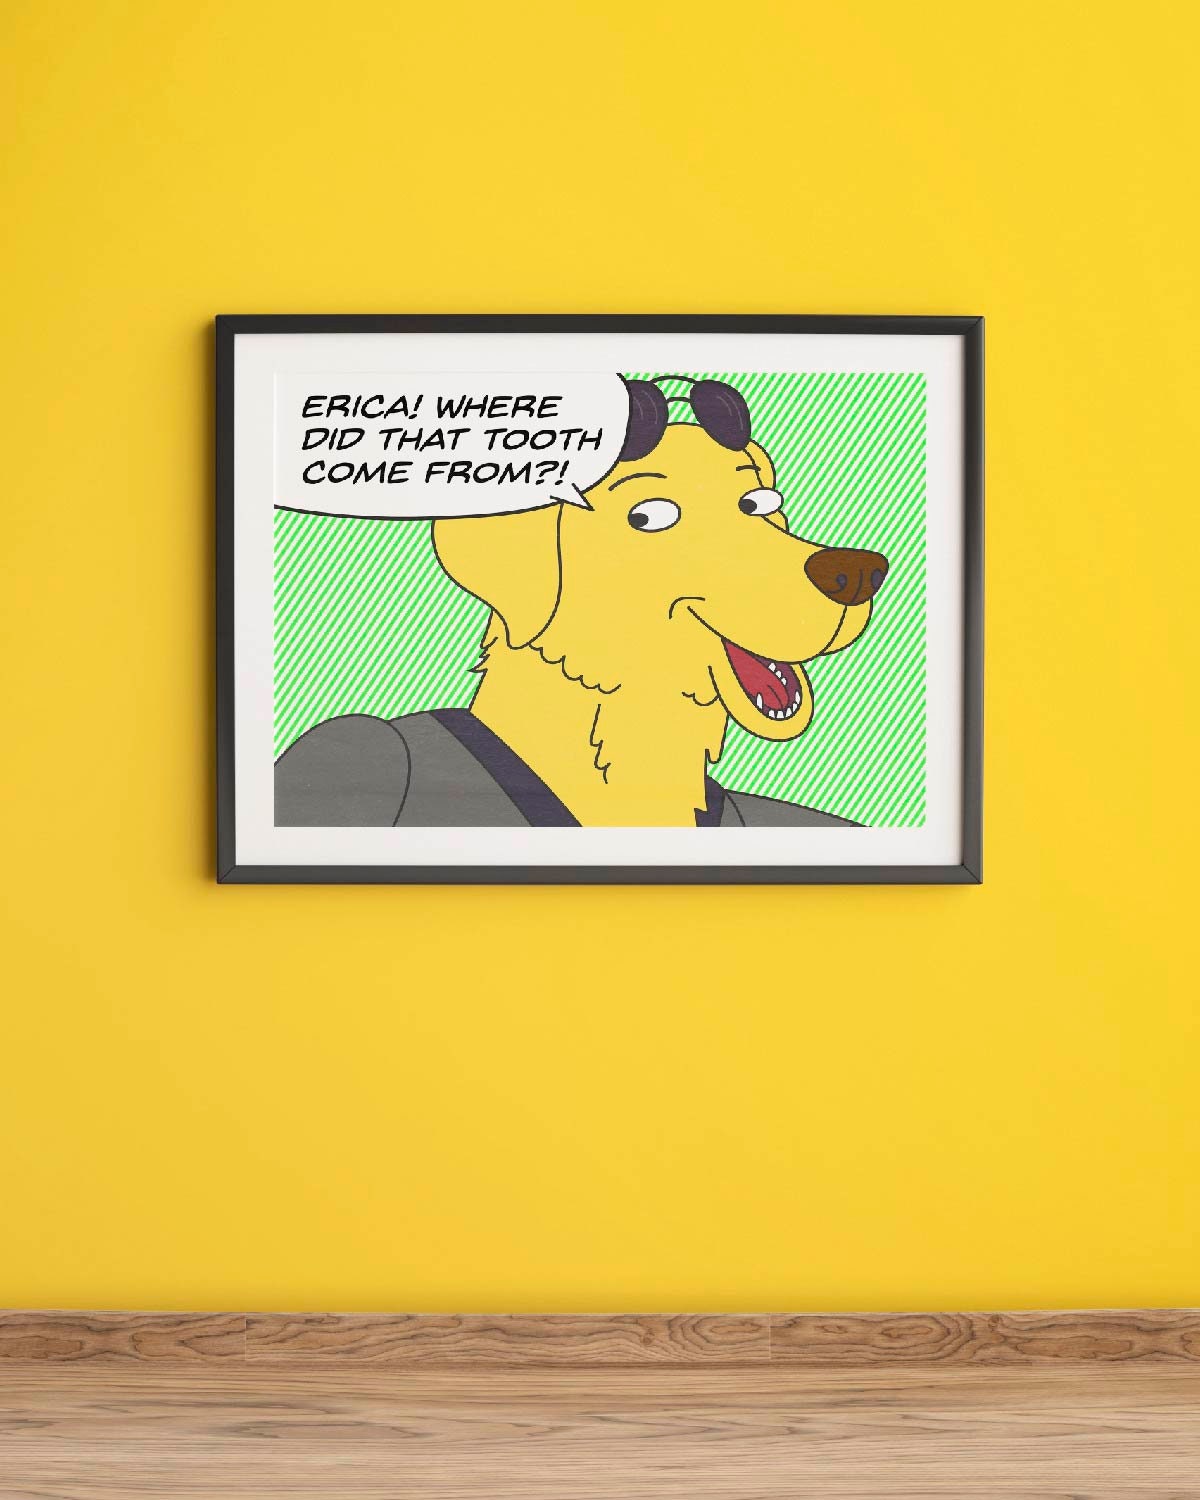 Mr. Pickles Posters & Wall Art Prints